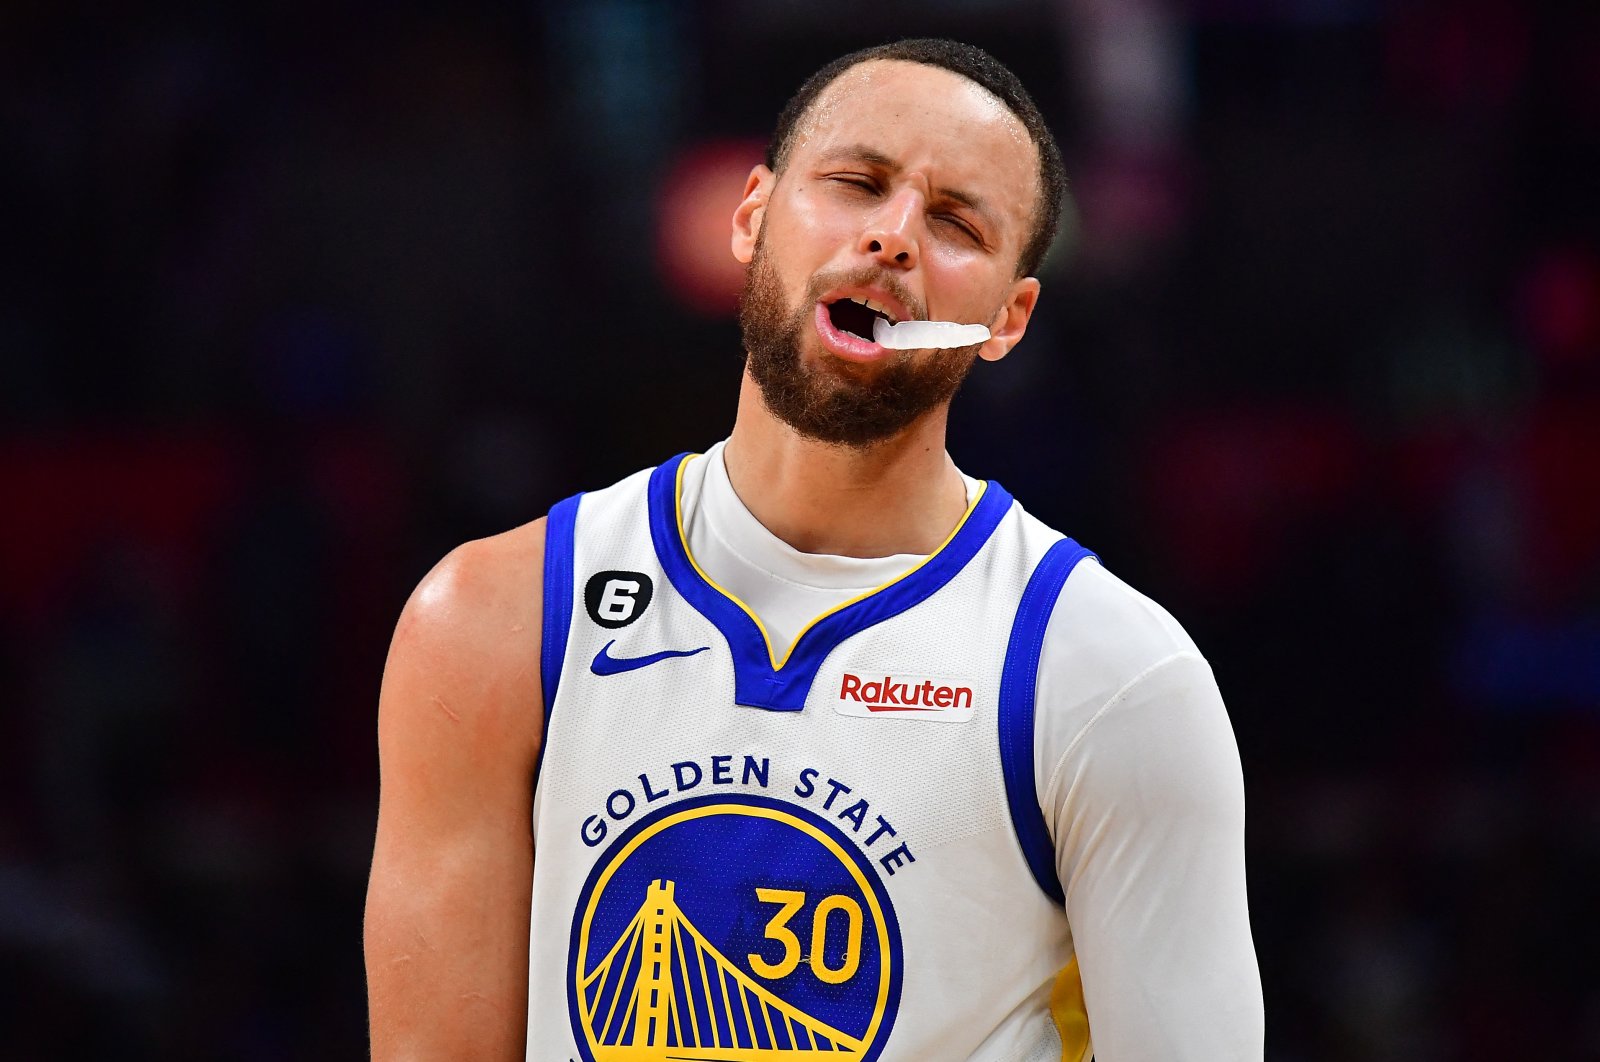 Golden State Warriors guard Stephen Curry reacts against the Los Angeles Clippers during the second half at Crypto.com Arena, Los Angeles, USA, Mar 15, 2023. (Reuters Photo)